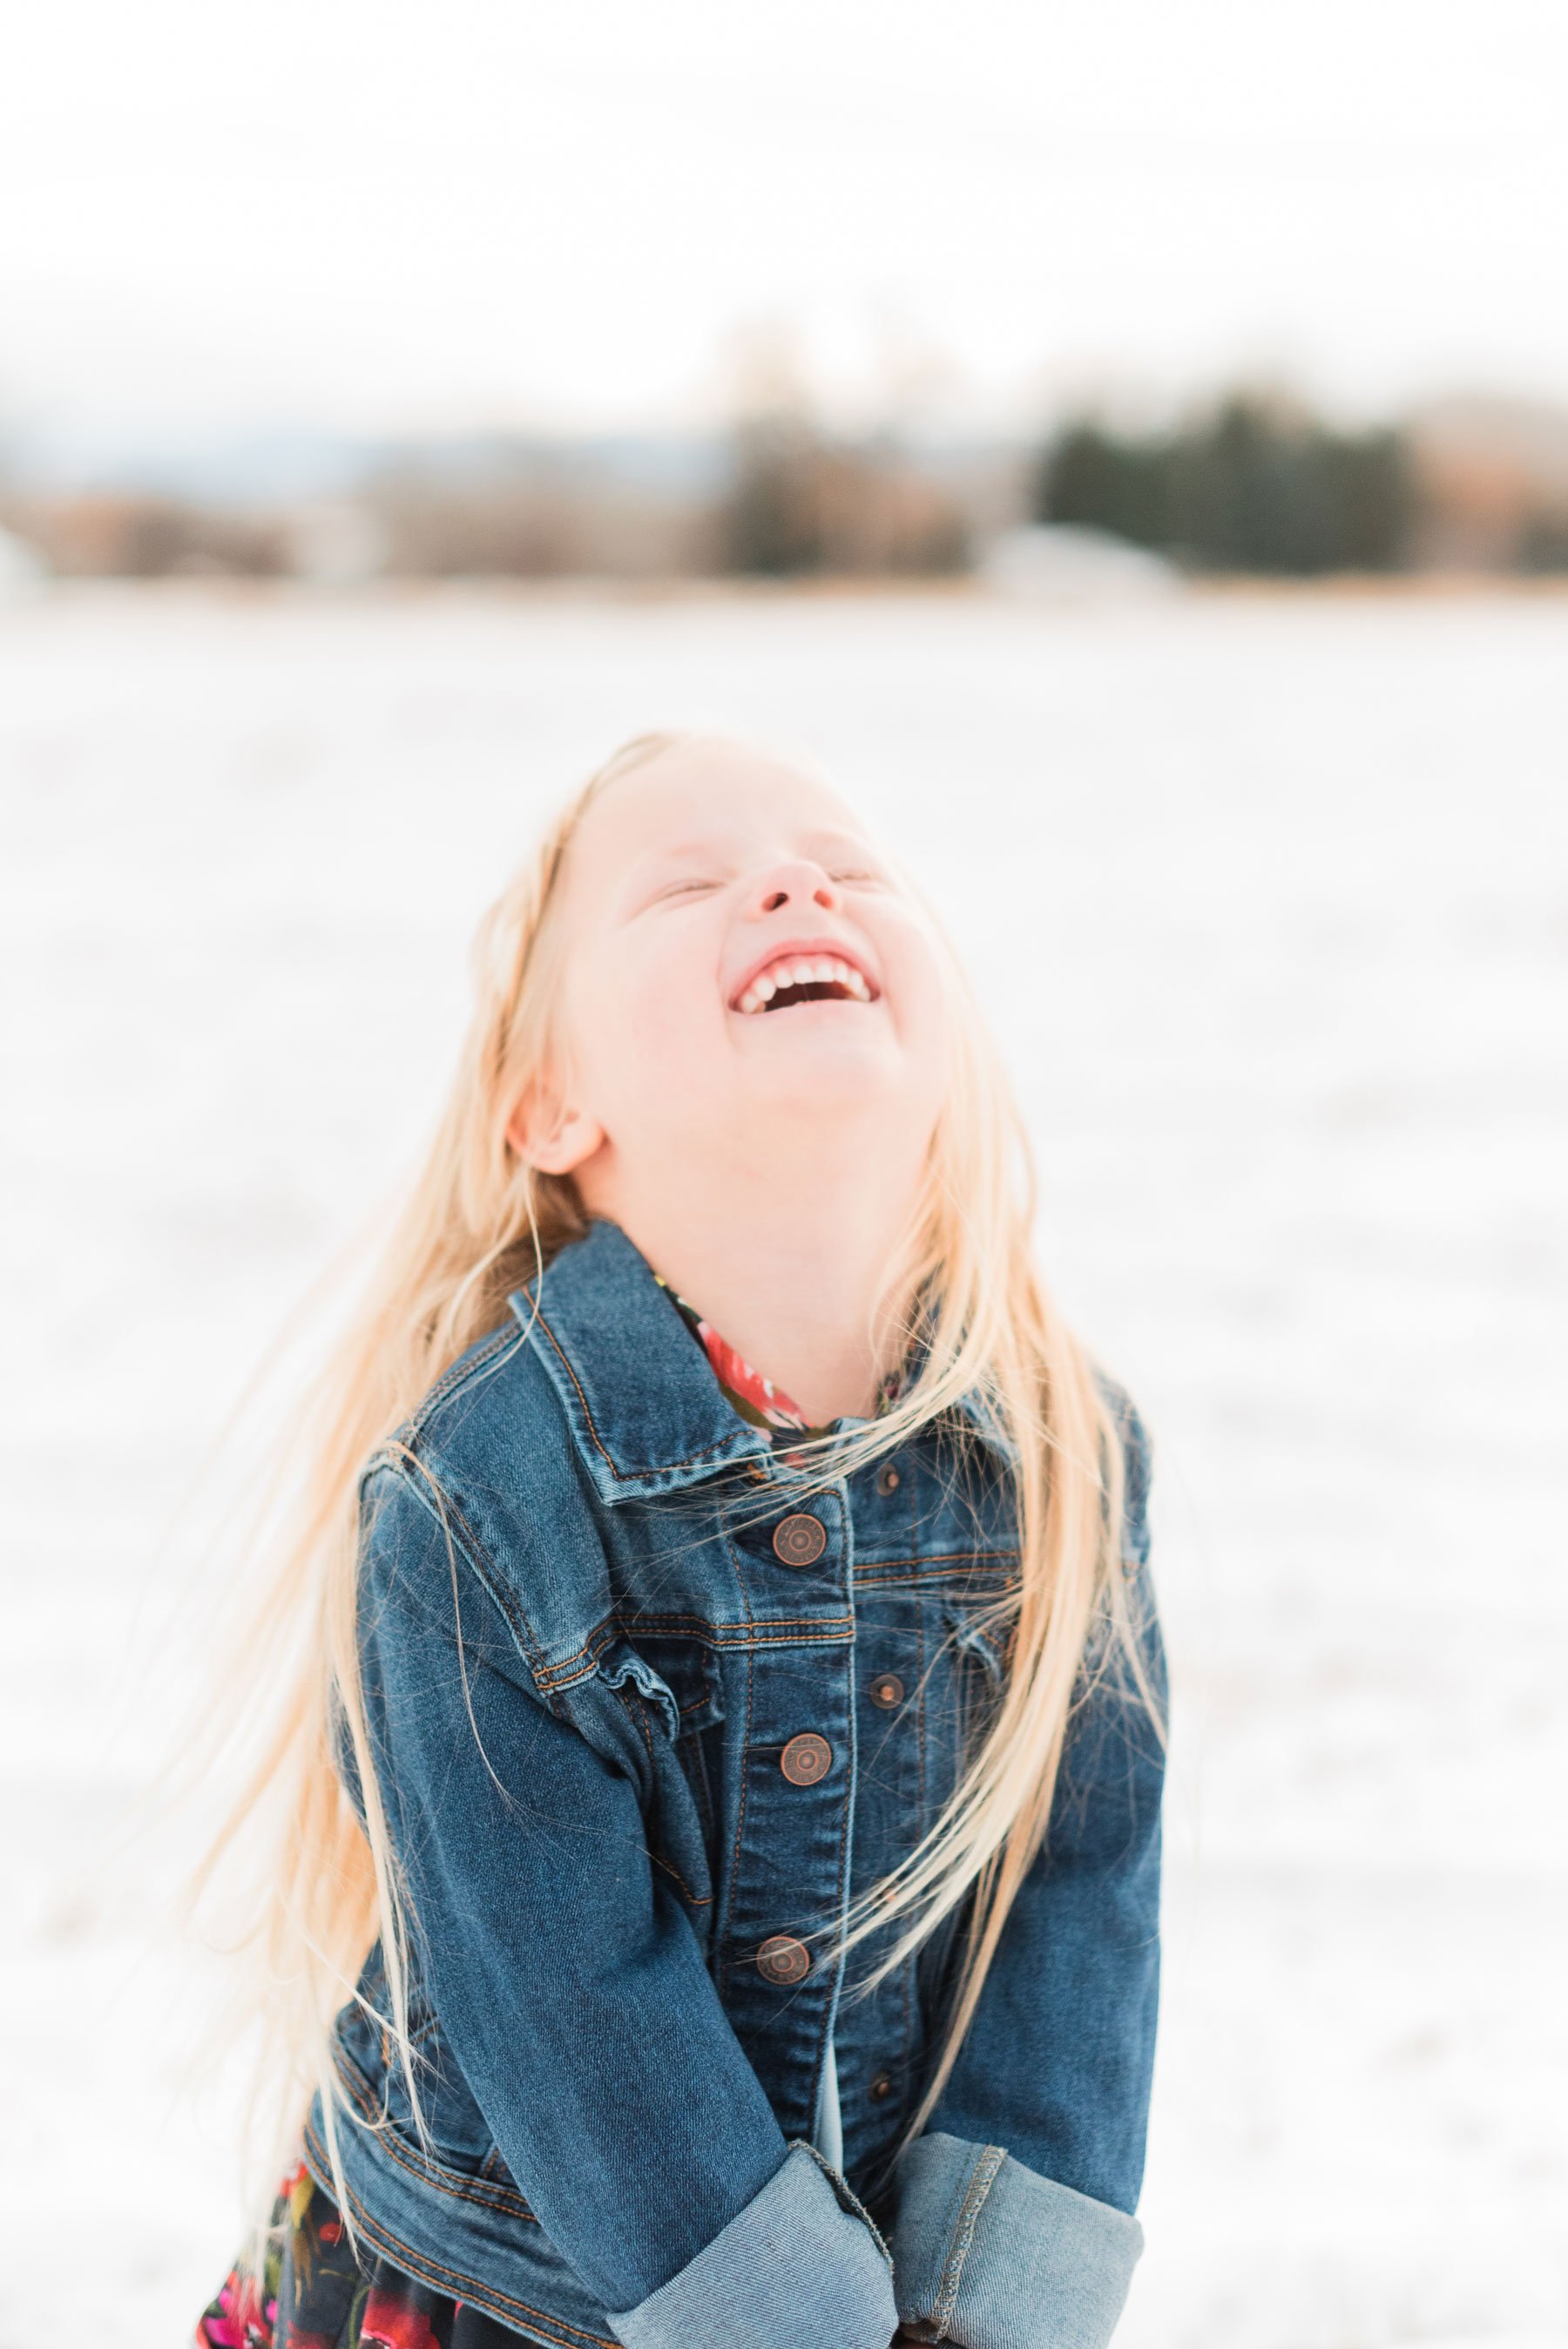  Jacquie Erickson, an Atlanta-based photographer captures a little girl looking up laughing as she stands in a snowy field. Mother-daughter photos mini me mommy and me&nbsp; #motherdaughterphotos #FamilyPhotographyJourney #atlantafamilyphotographer&n